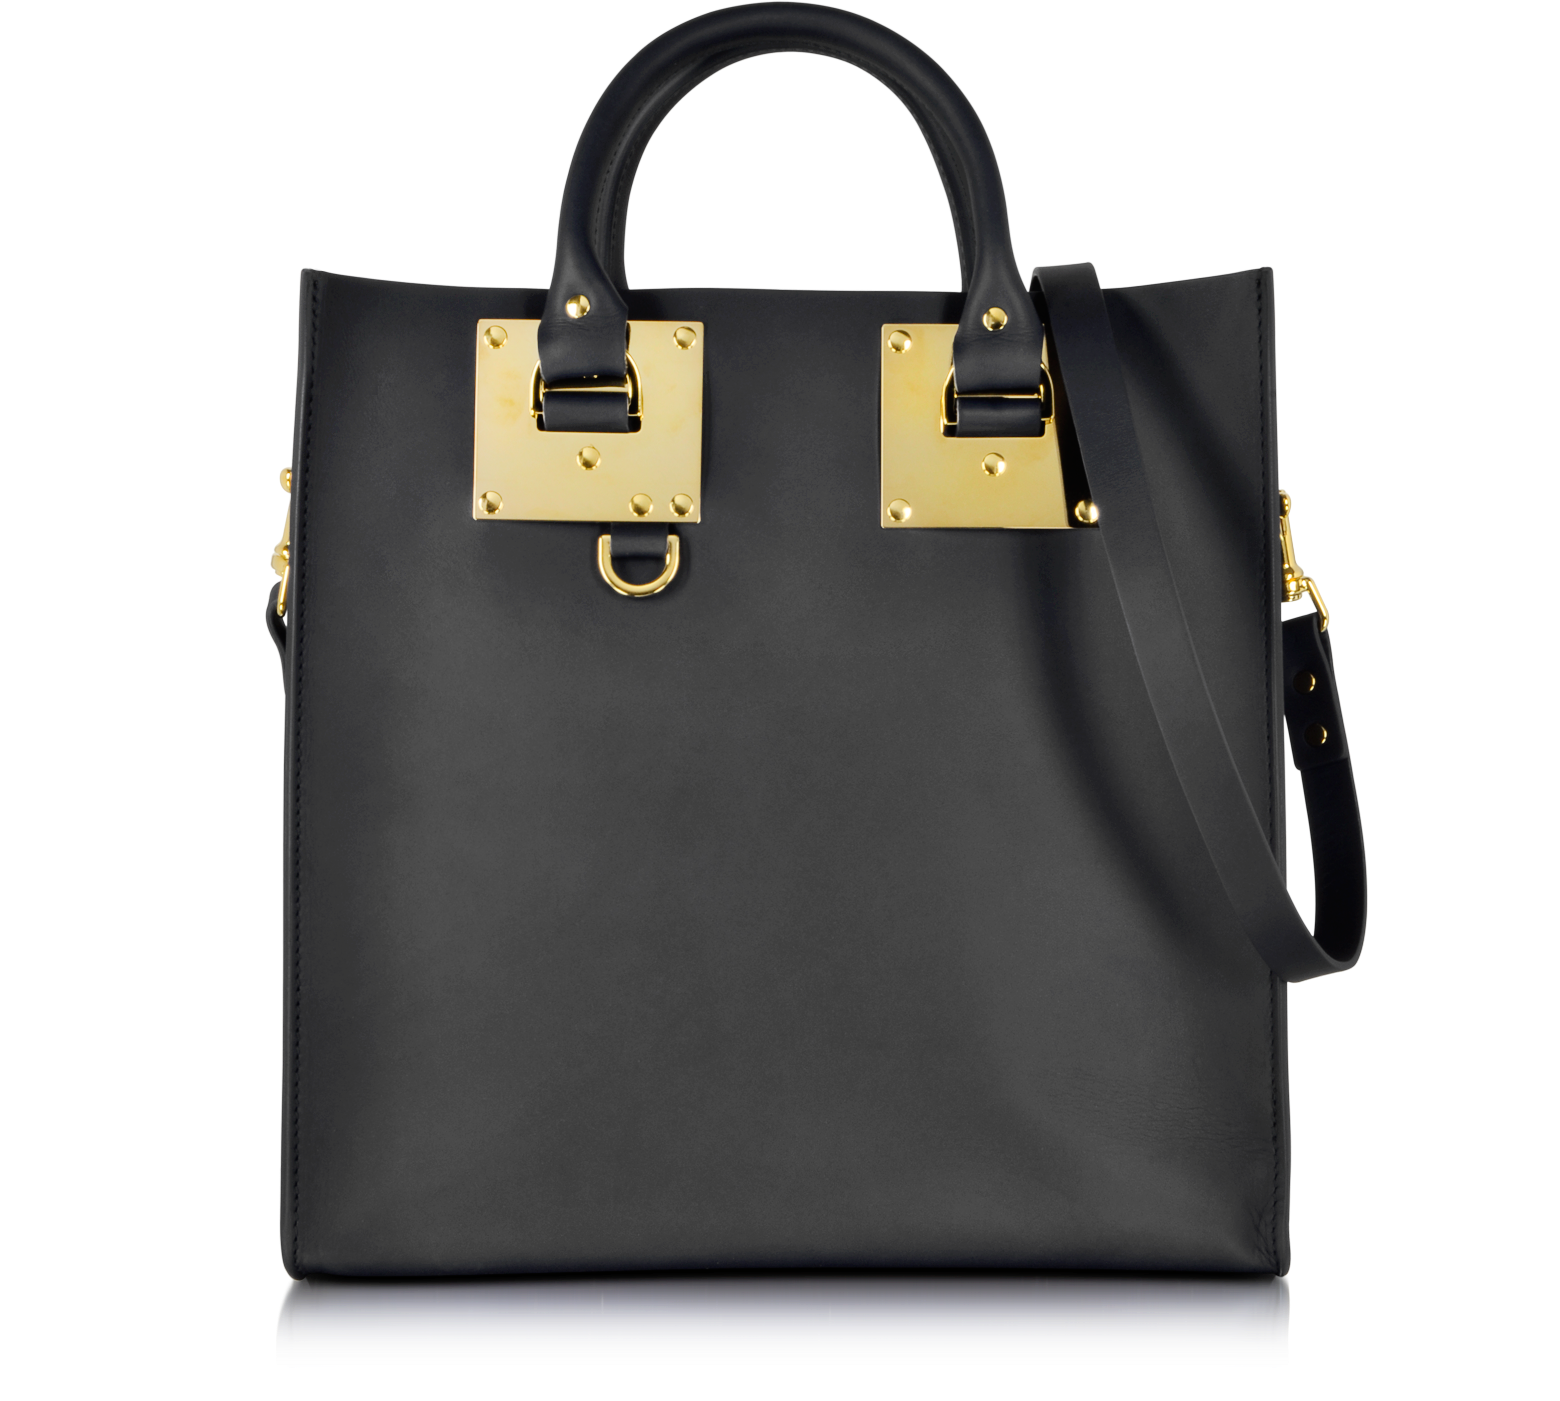 Sophie Hulme Black Large Leather Square Tote at FORZIERI